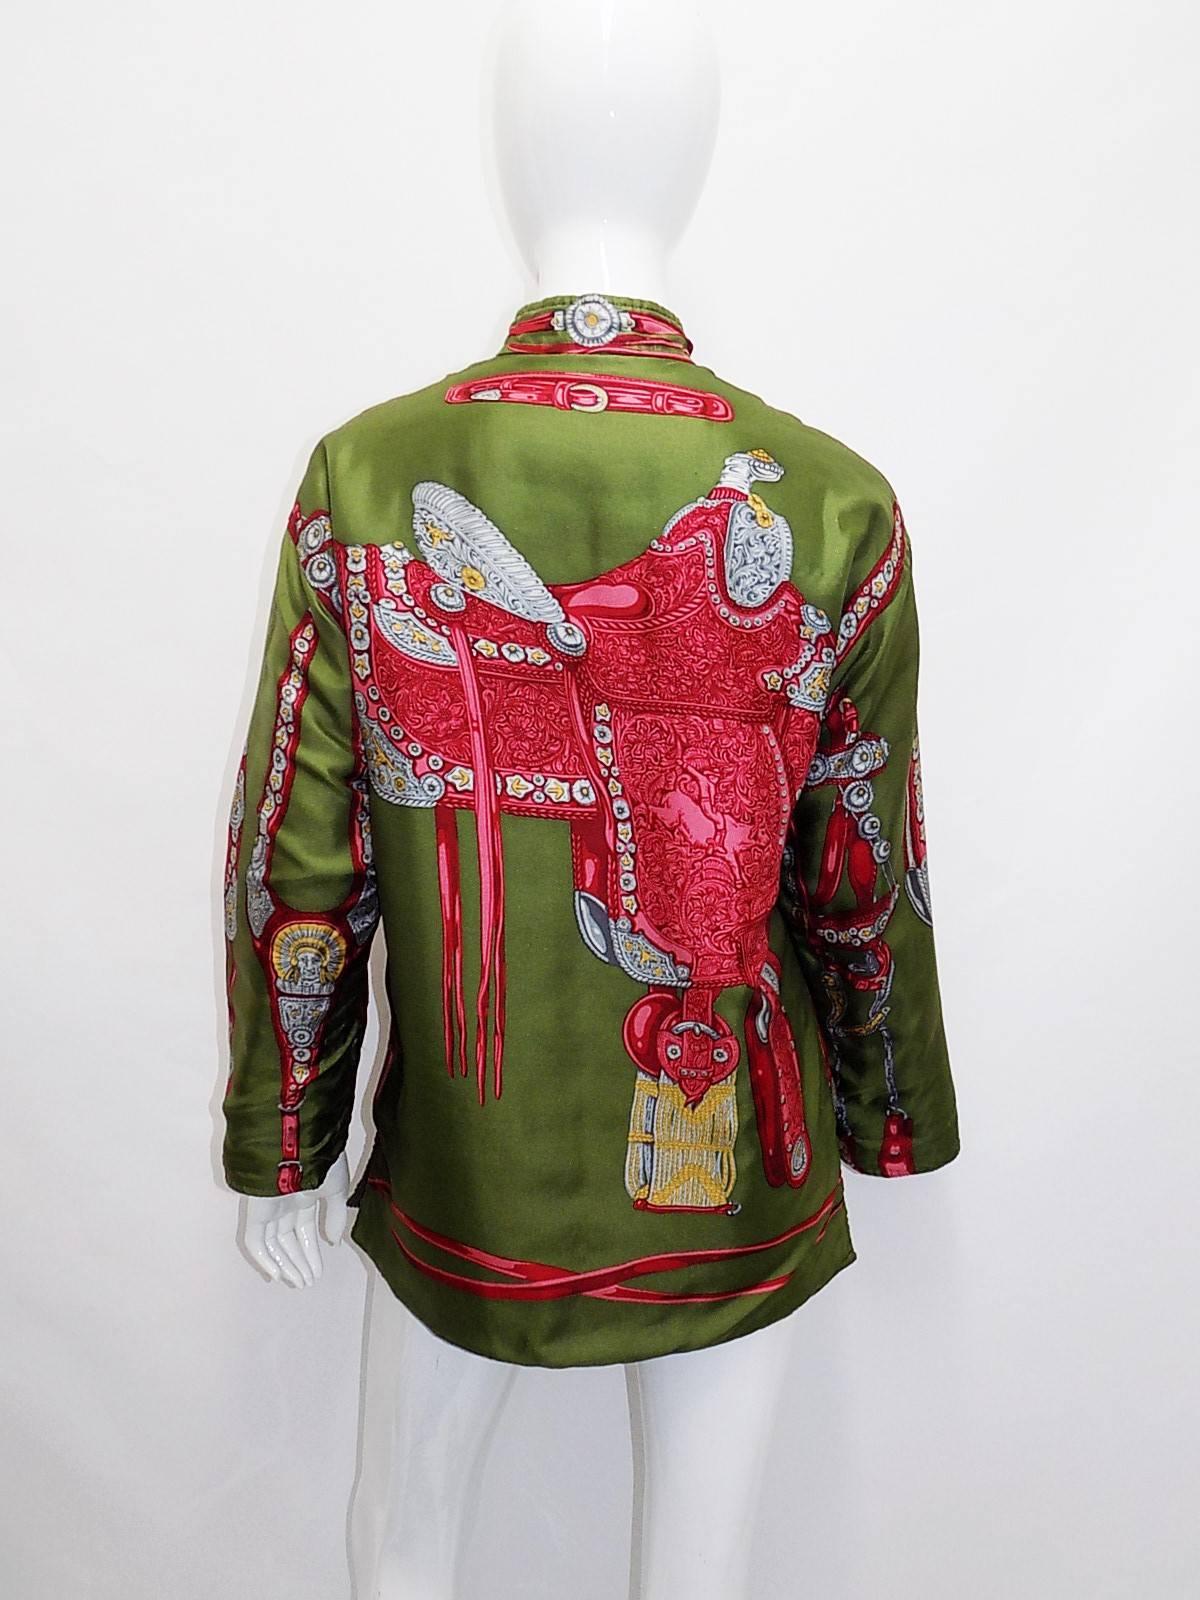 Gucci  vintage reversible quilted  jacket silk twill with Indian equestrian prints horse bid in green burgundy with silver and gold details . jacket can be reversed into waffled  corduroy fabric very light weight zipper front closure two side slits